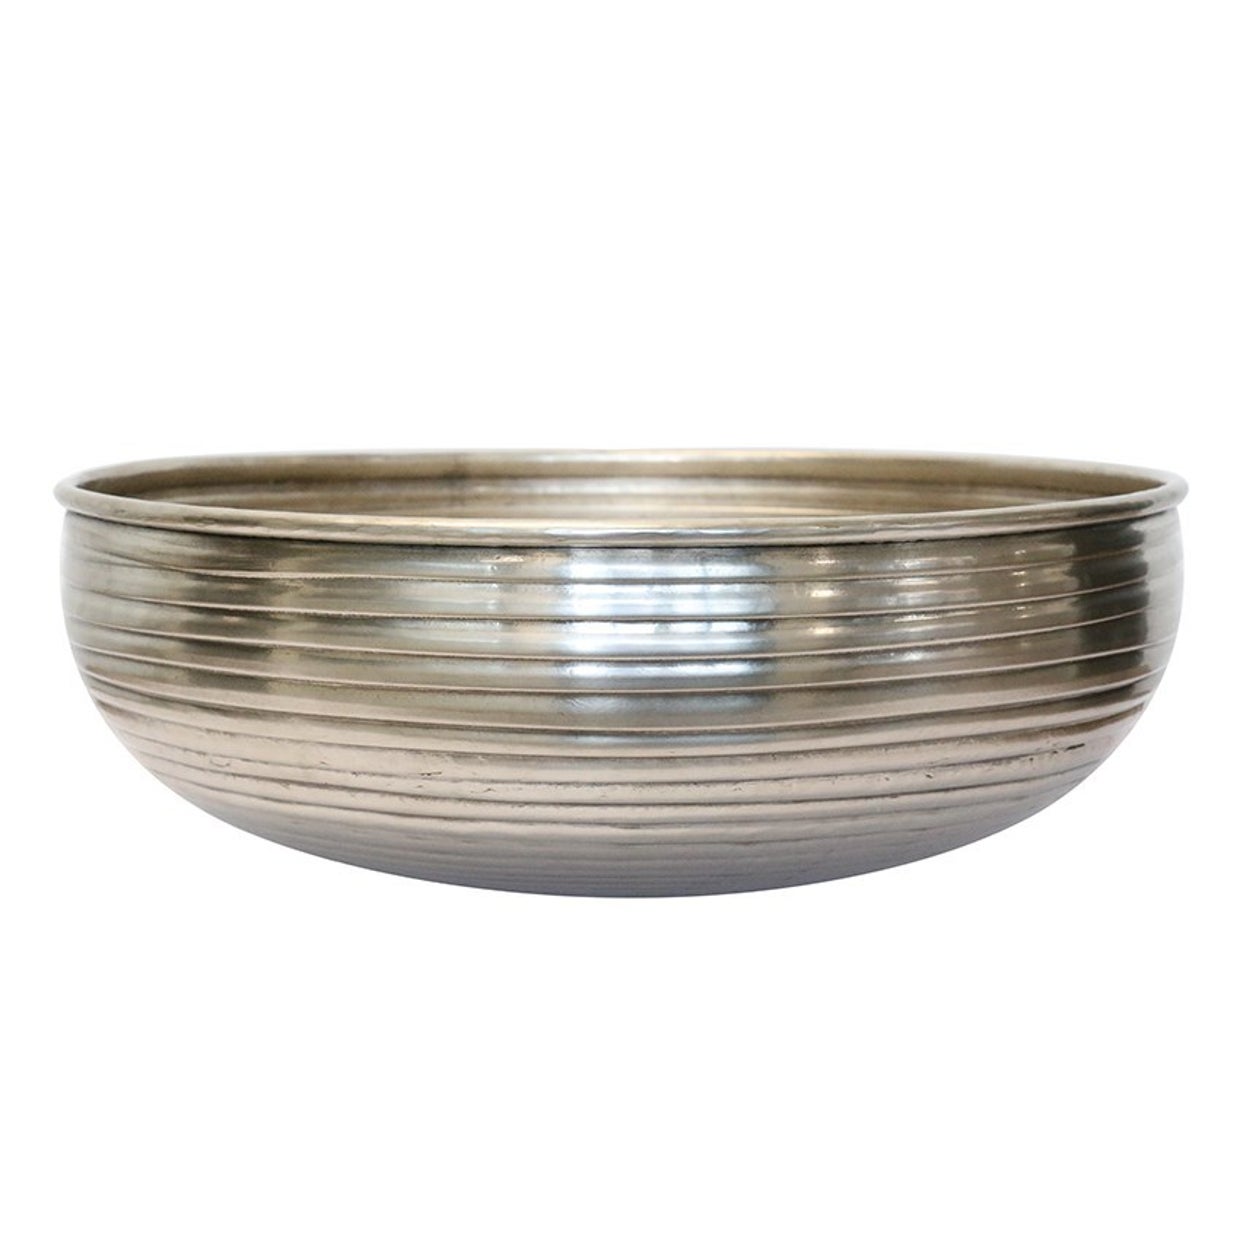 Chelsea Brass Ornate Ridged Bowl in Silver Antique Finish